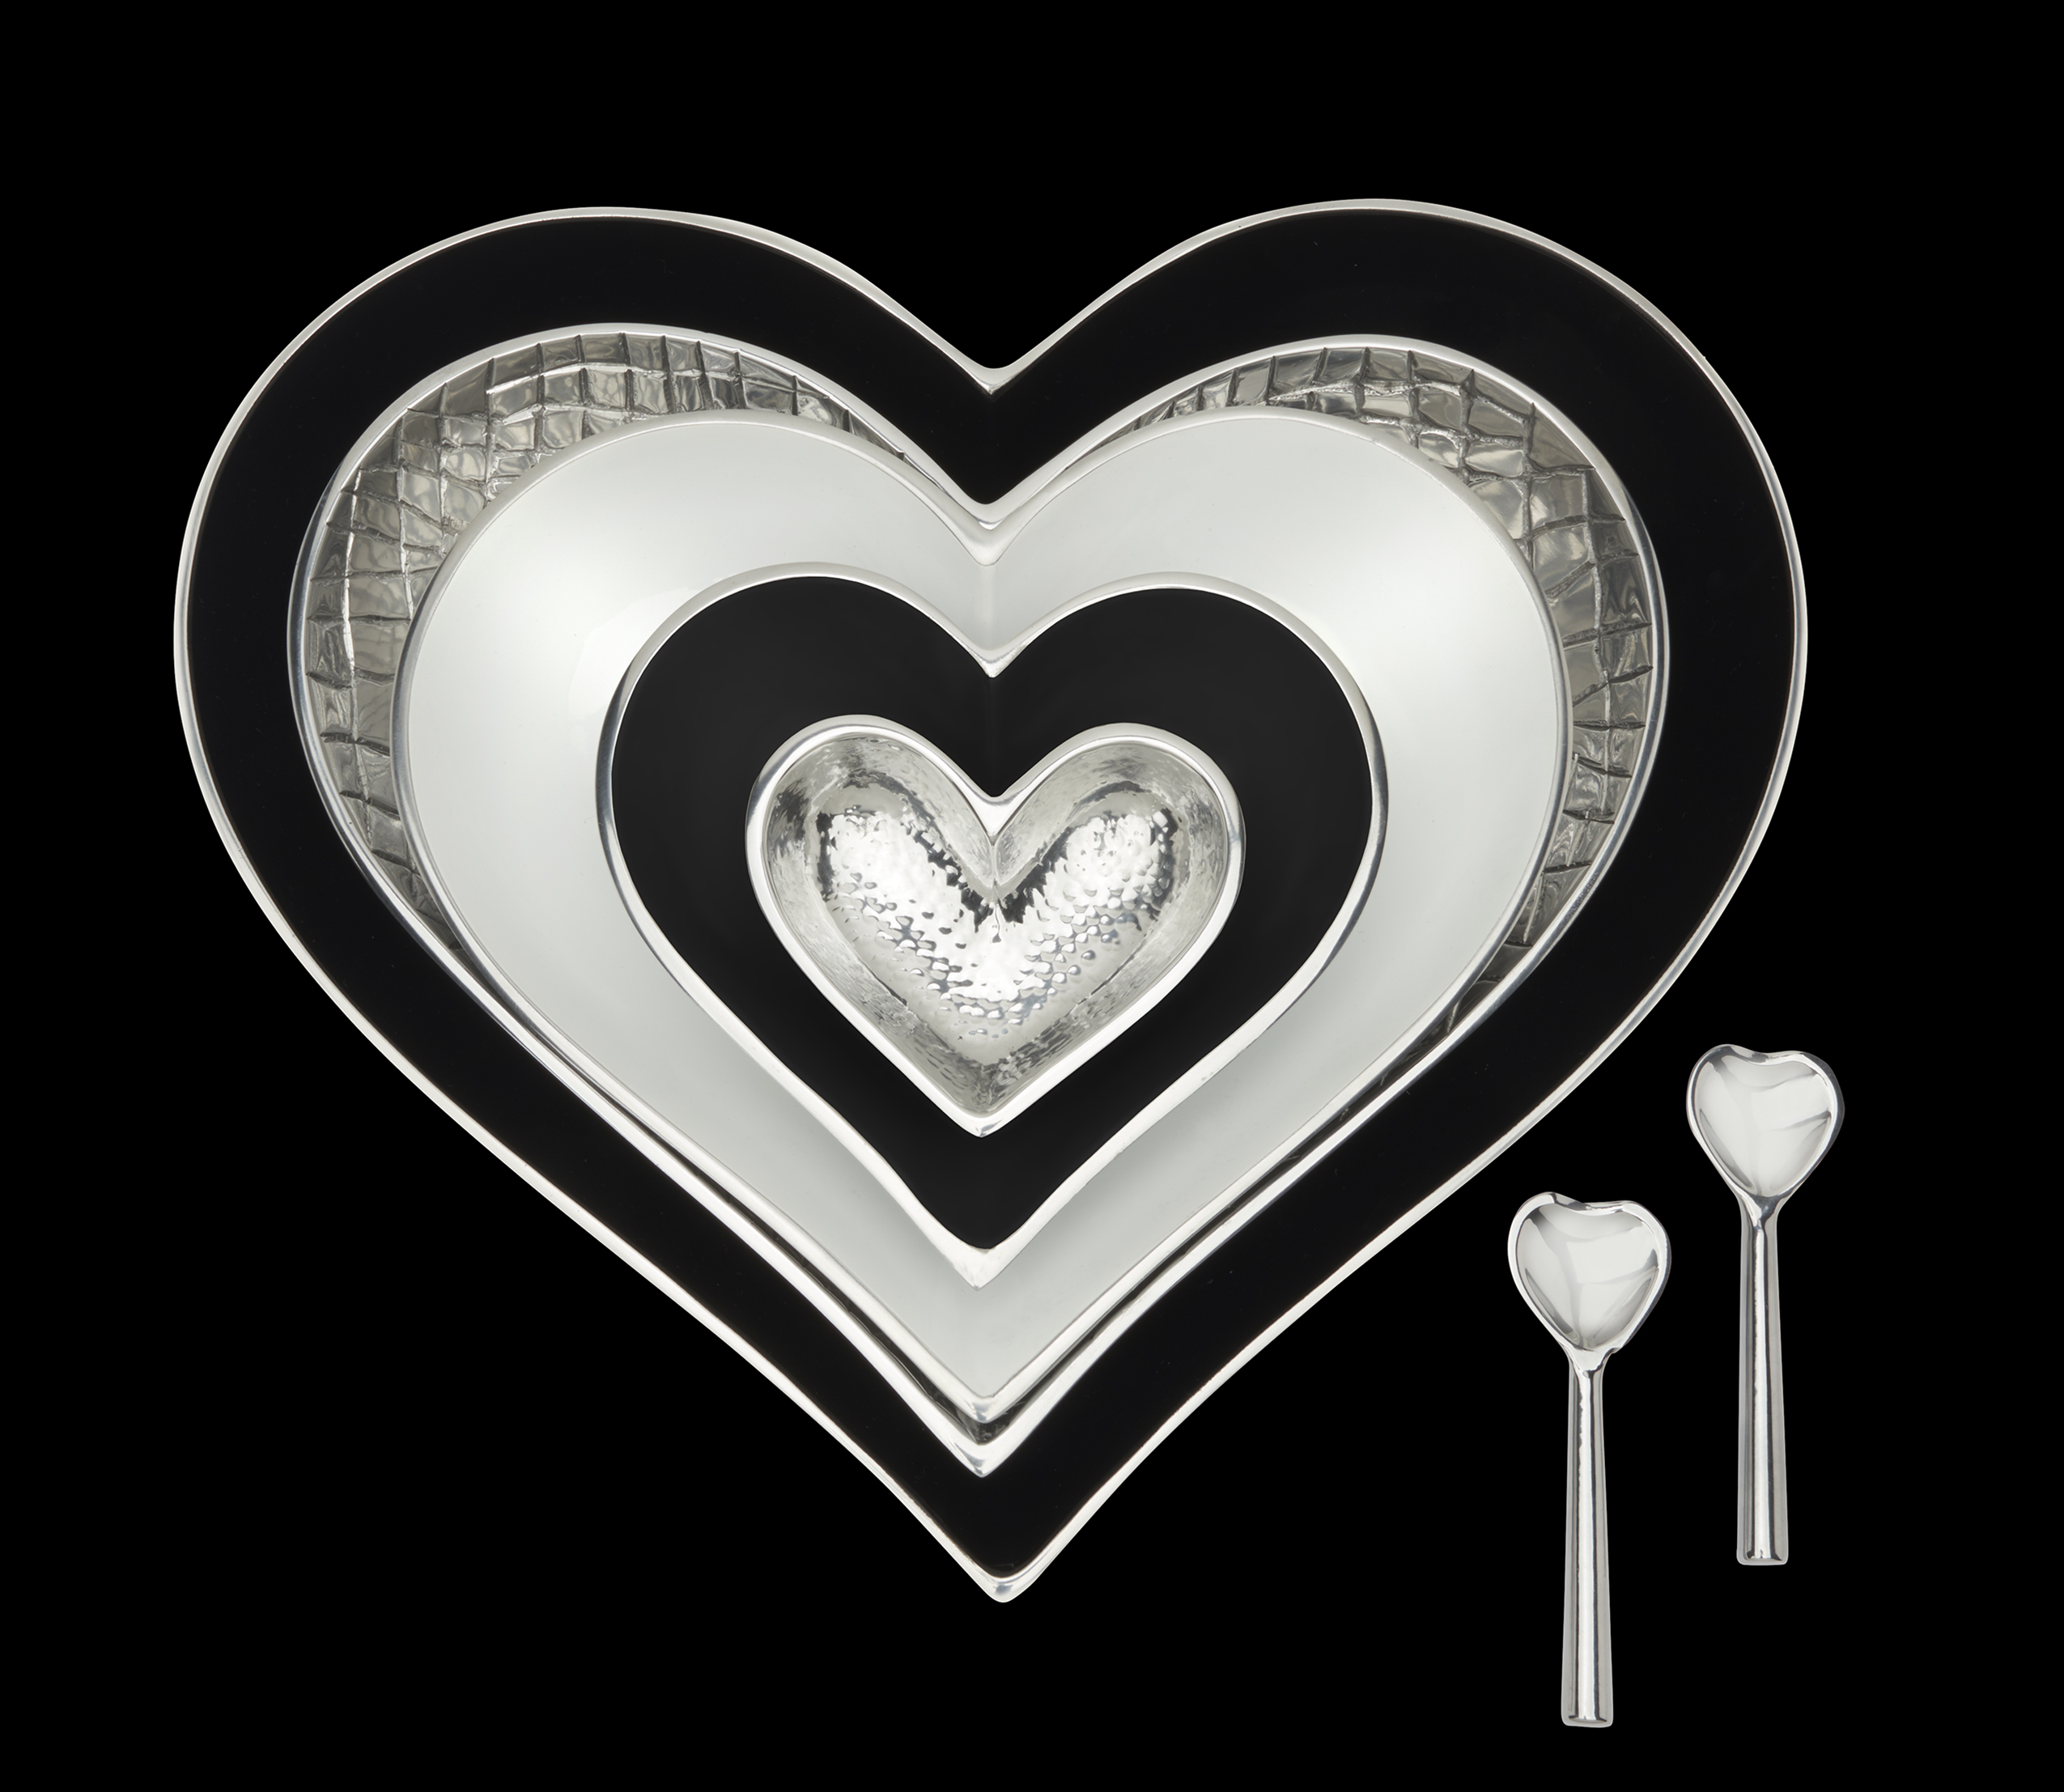 5-hearts-bowl-set-with-2-heart-spoons-black-white